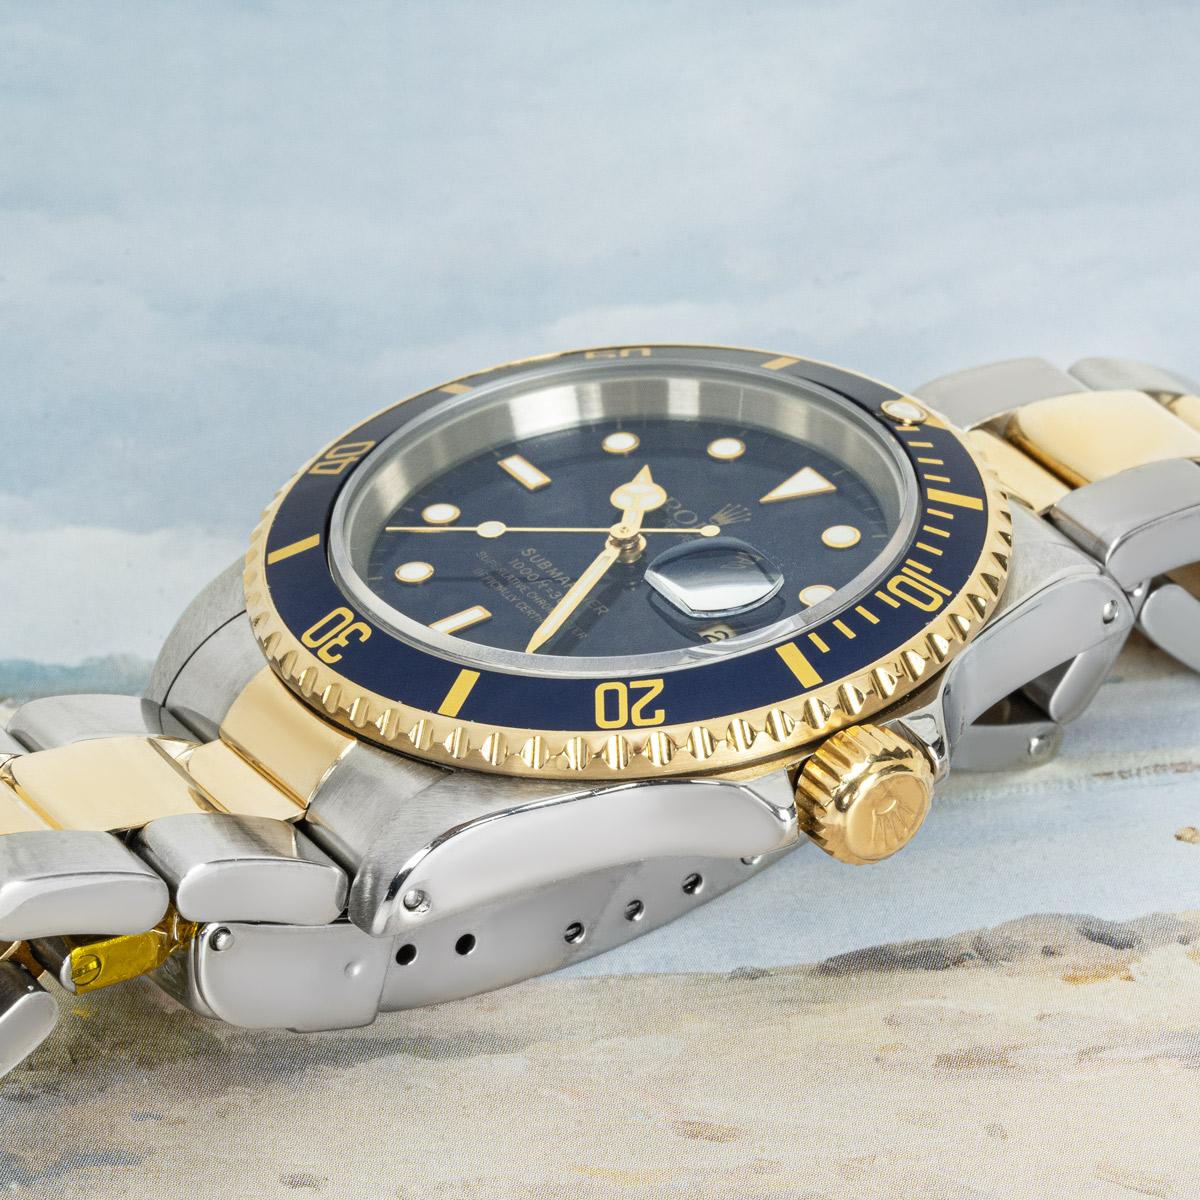 A 40mm steel and yellow Submariner Date by Rolex. Features a blue dial with applied hour markers, a yellow gold uni-directional rotating bezel and a blue bezel insert. Fitted with a sapphire glass, a self-winding automatic movement, a stainless